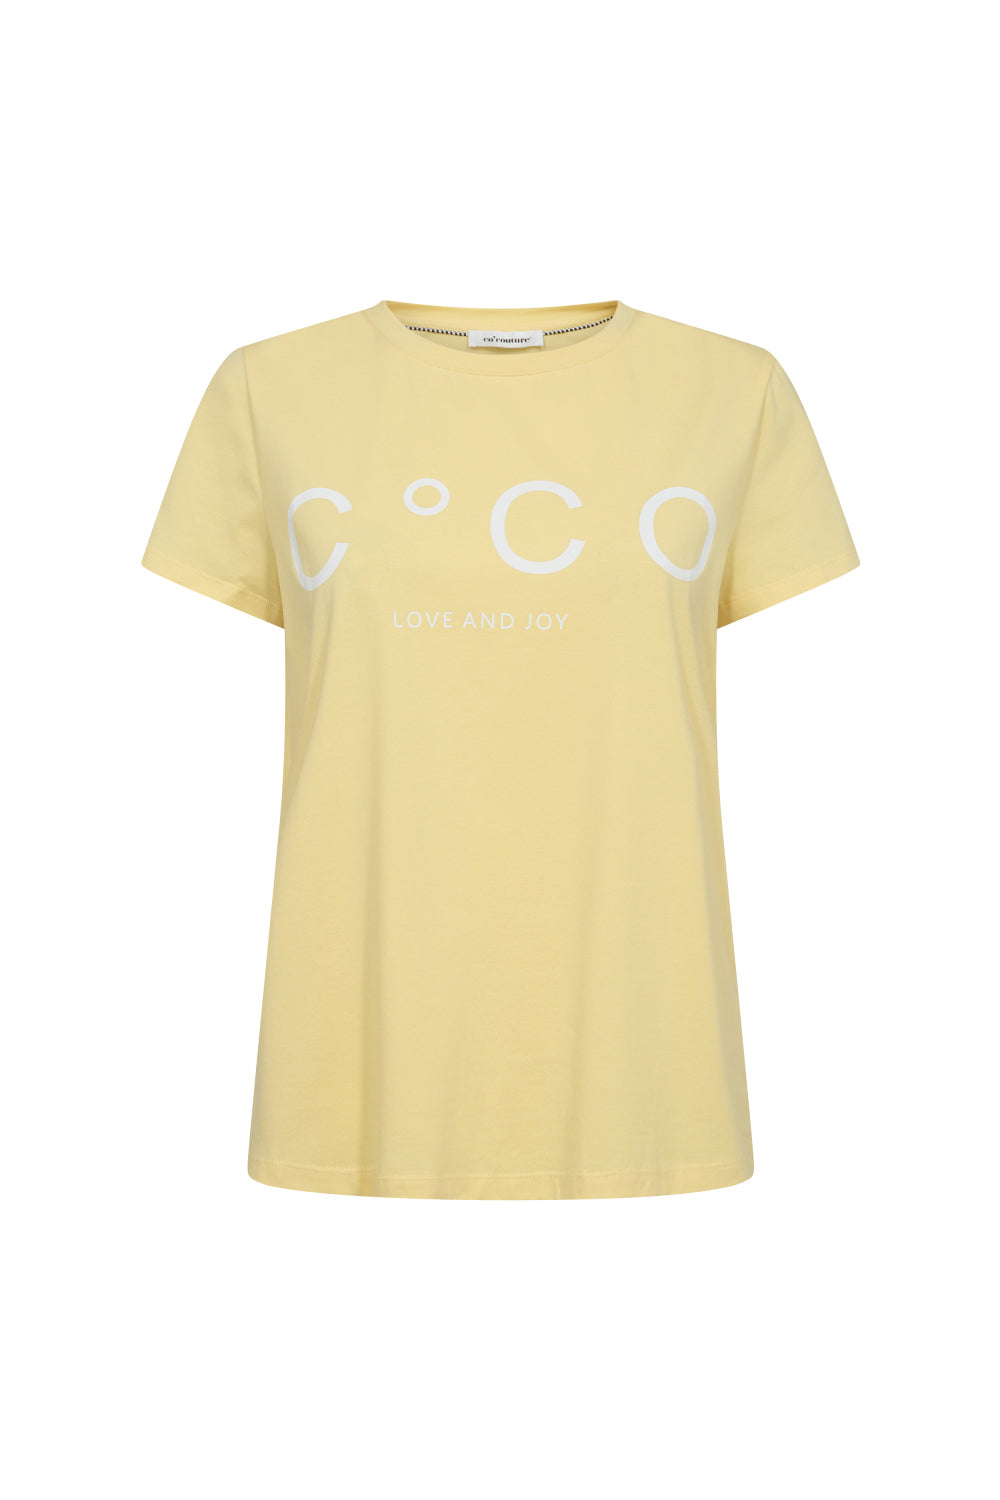 Co'Couture Coco Signature Tee - Pale Yellow - RUM Amsterdam